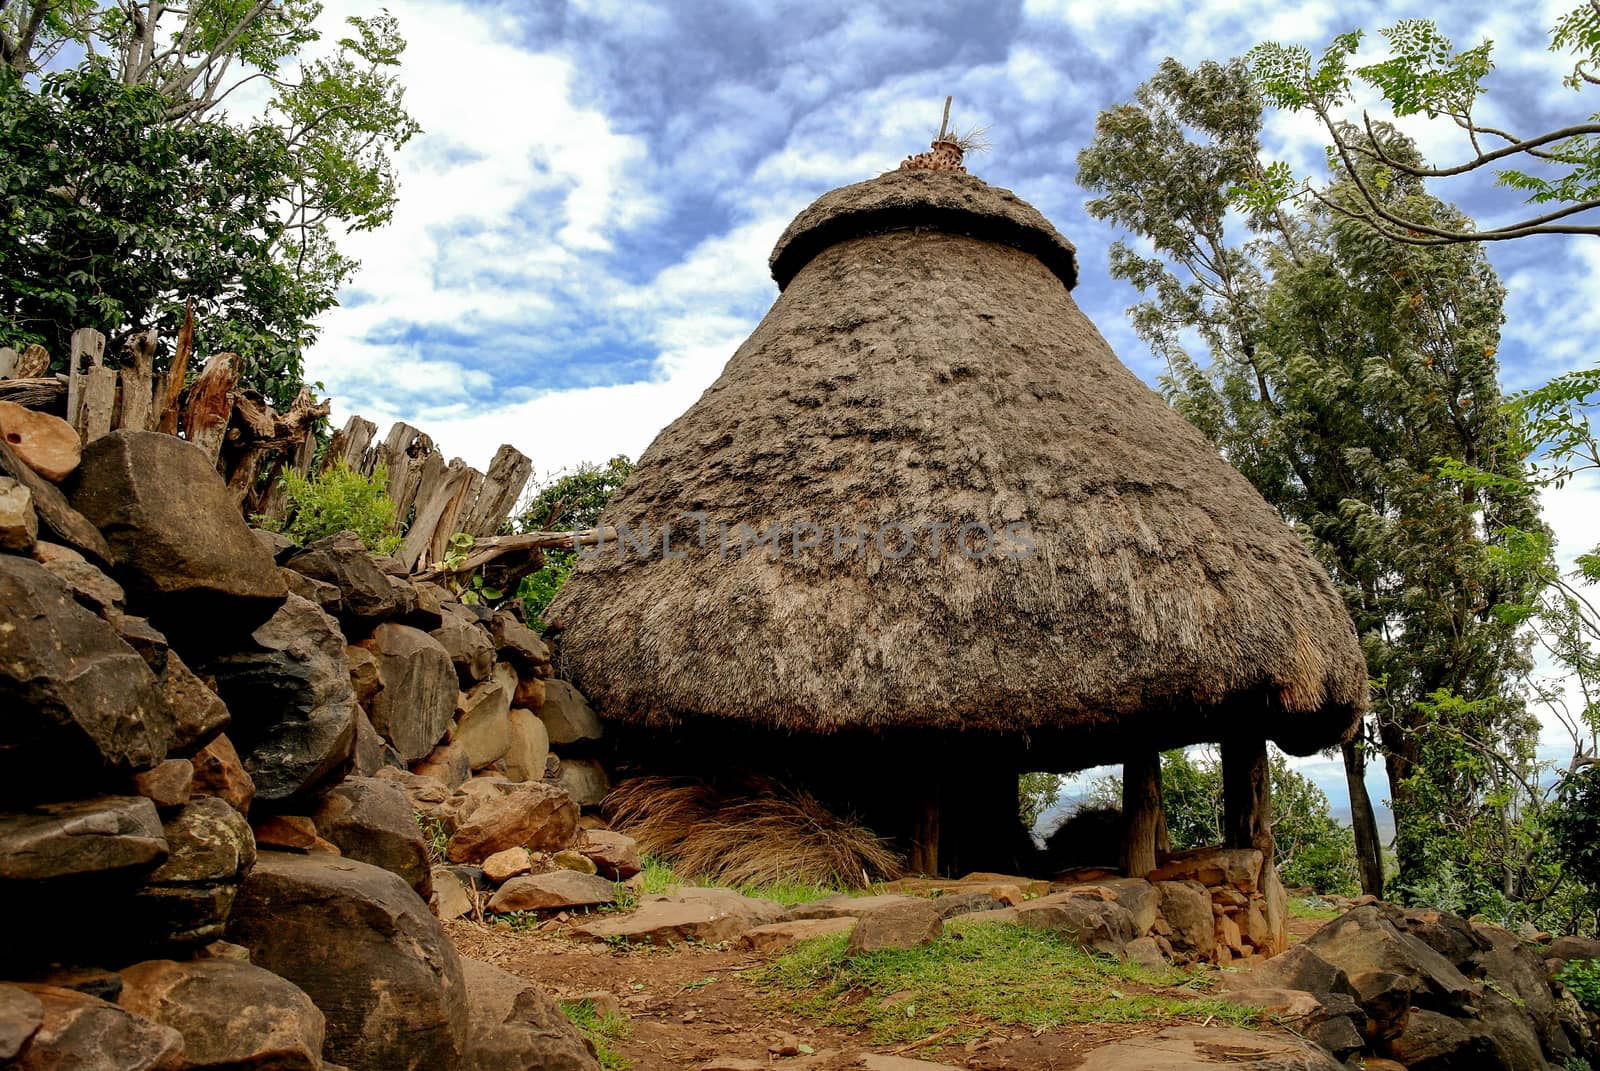 Traditional Konso tribe house, Ethiopia by homocosmicos